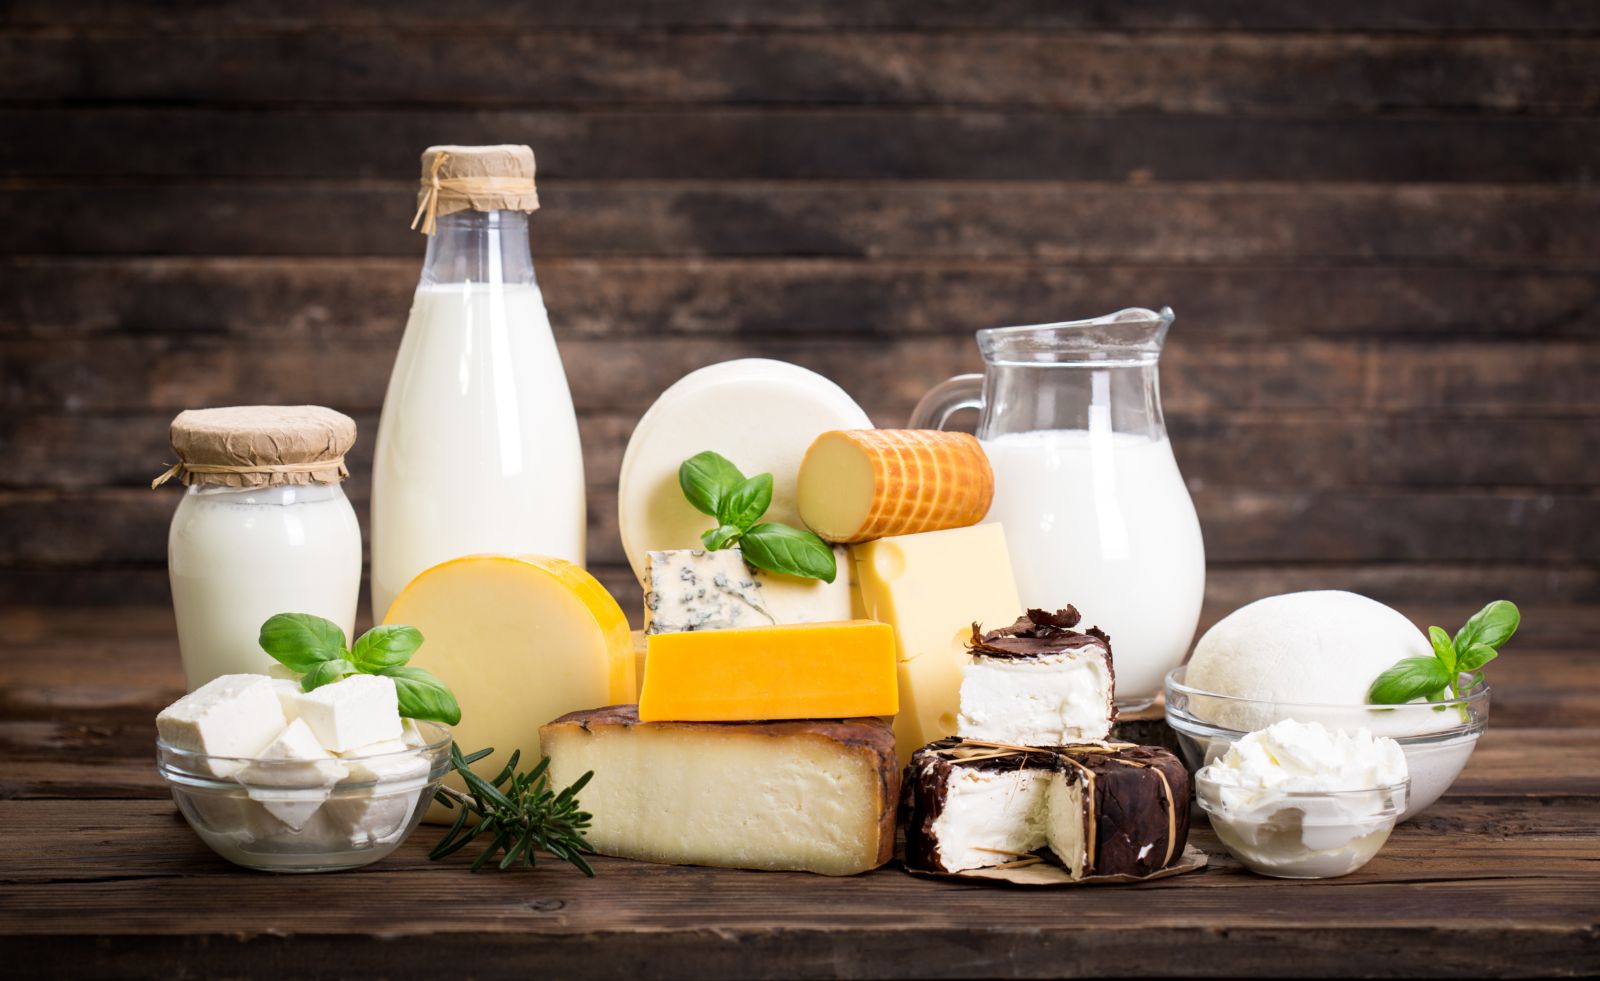 Reduce your carbon footprint by eating the right kinds of dairy